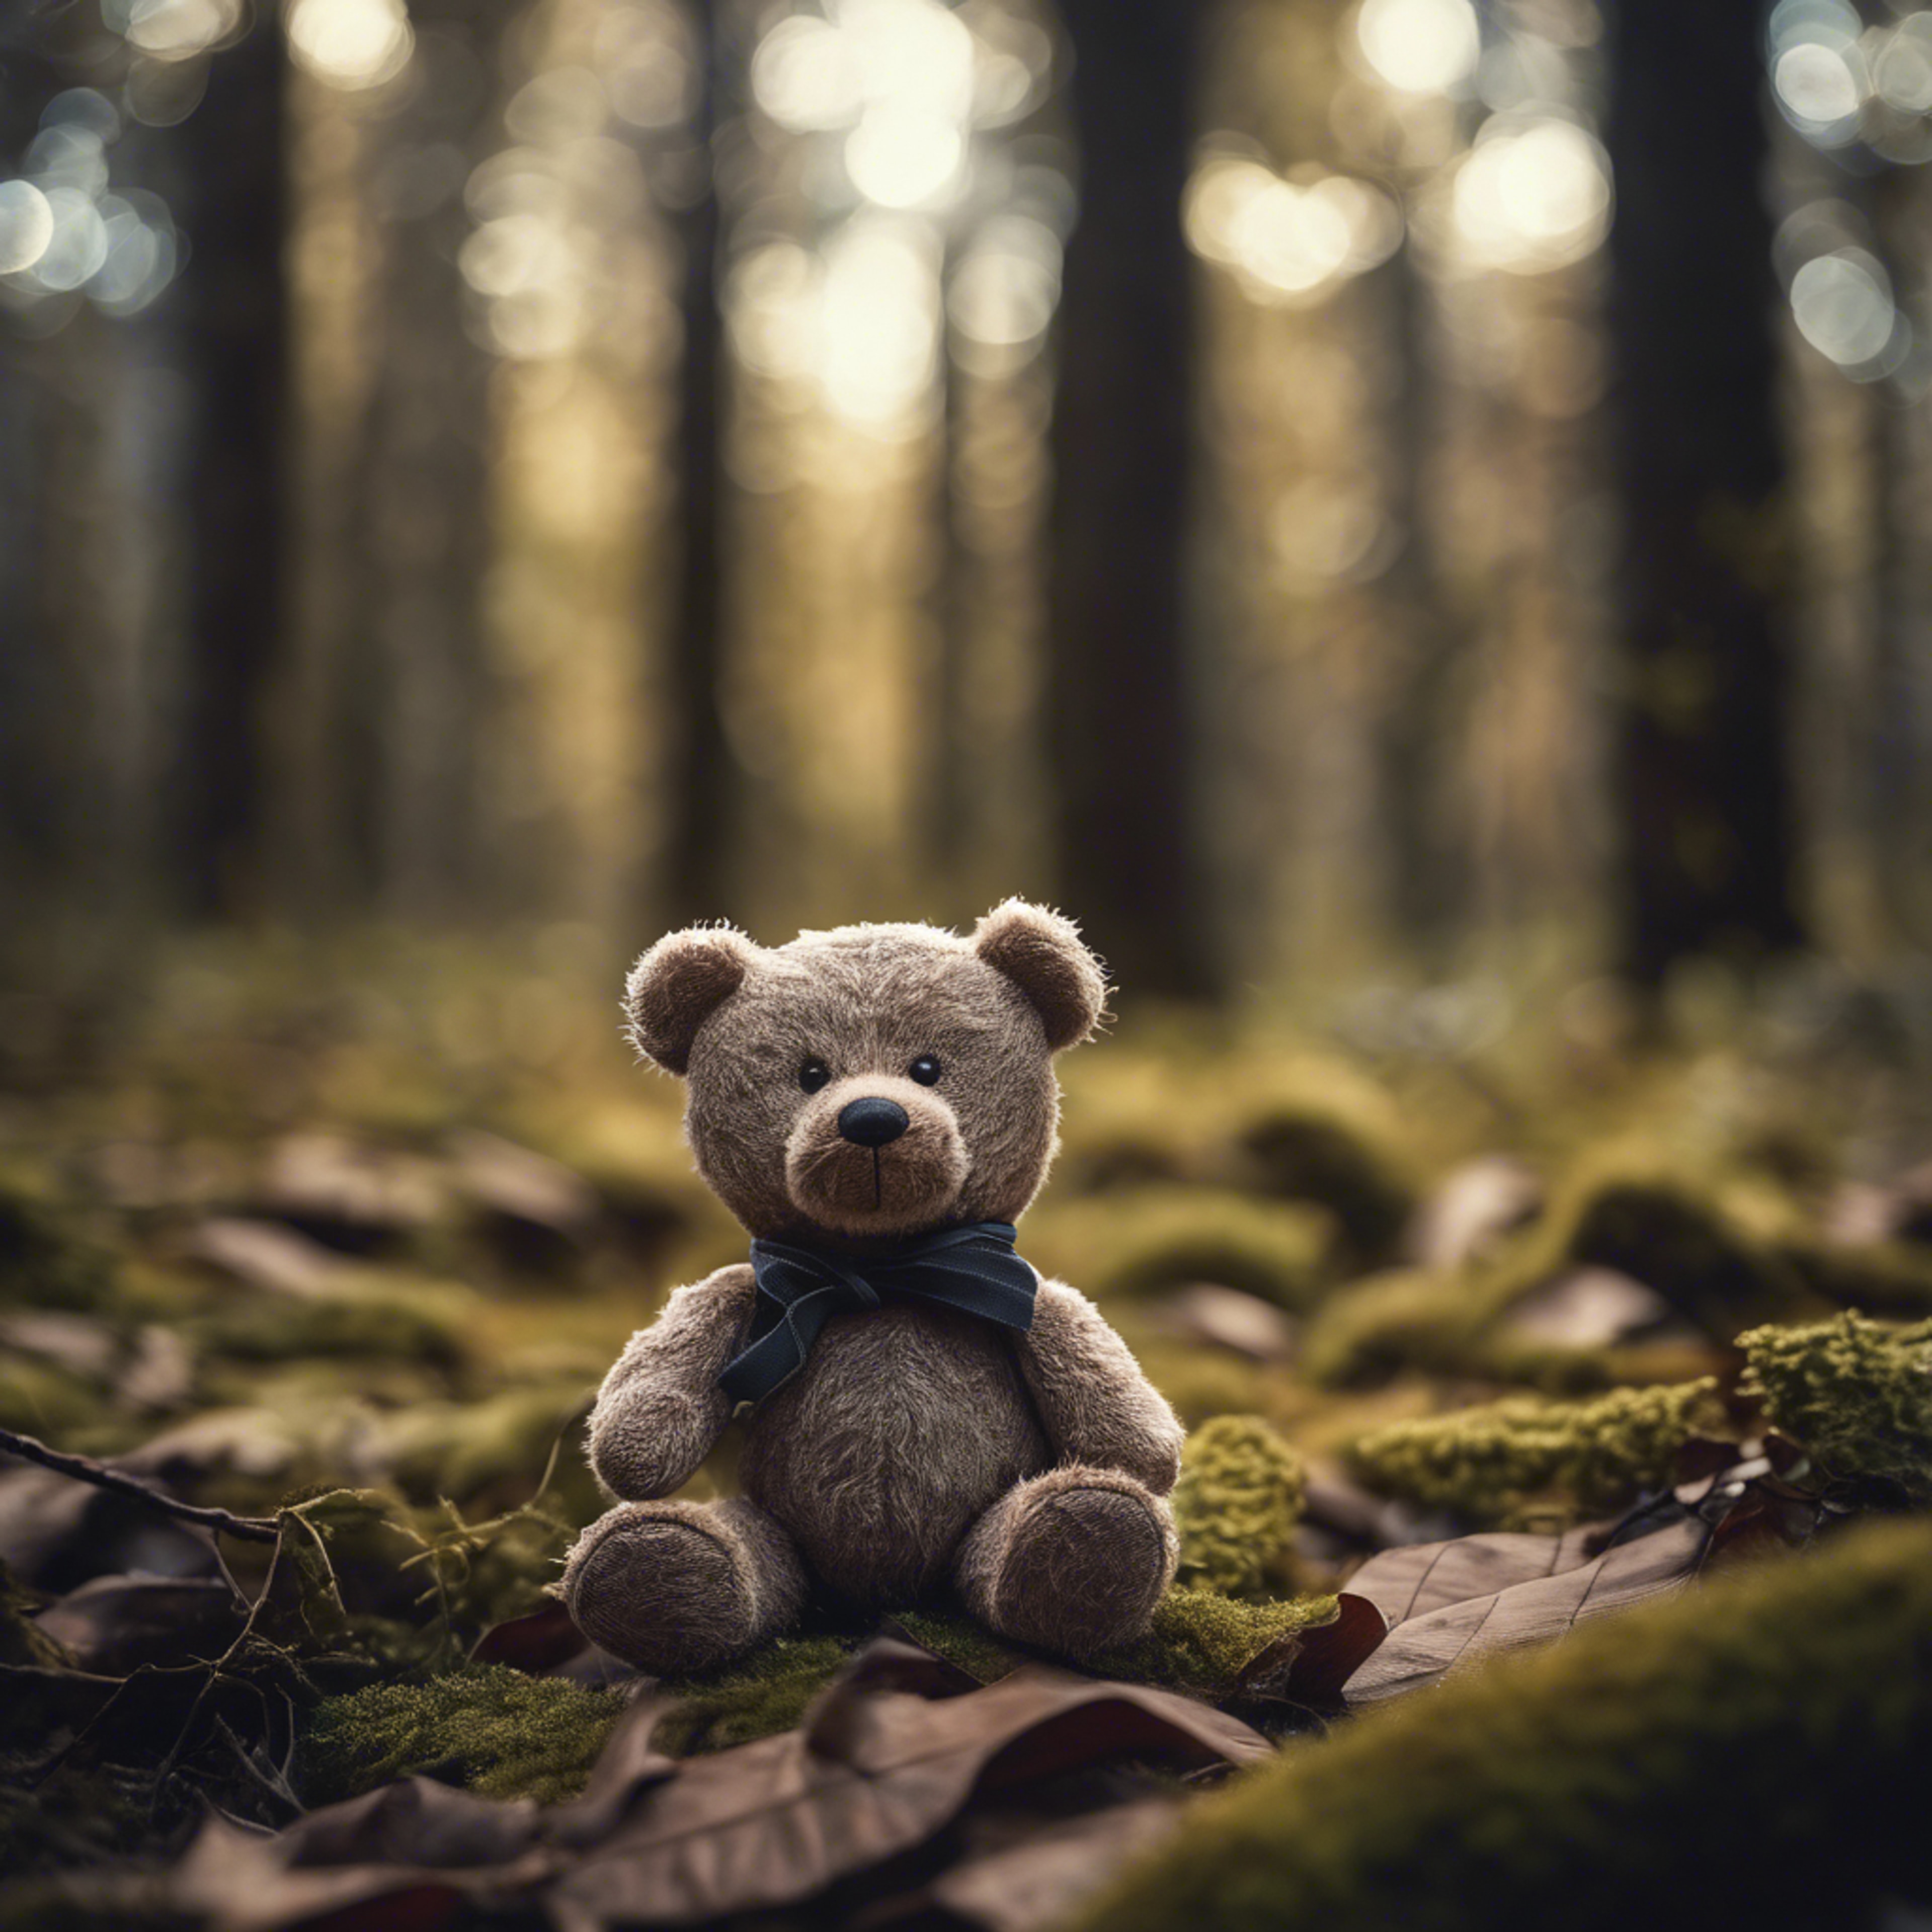 A teddy bear lost and alone in a dark forest. Tapéta[4d225efade314682baea]